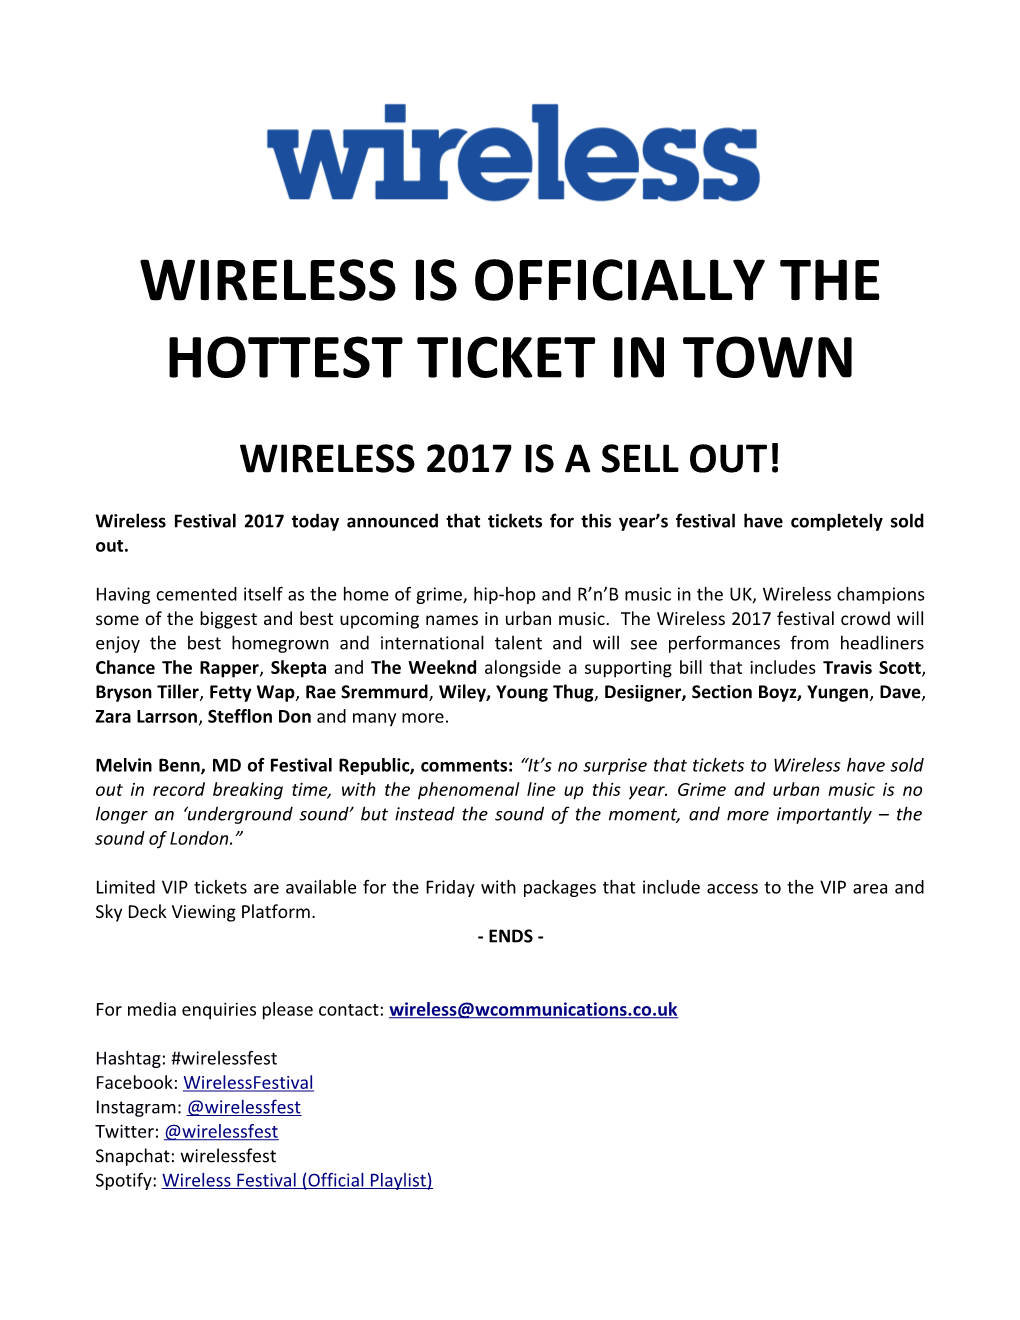 Wireless Is Officially the Hottest Ticket in Town